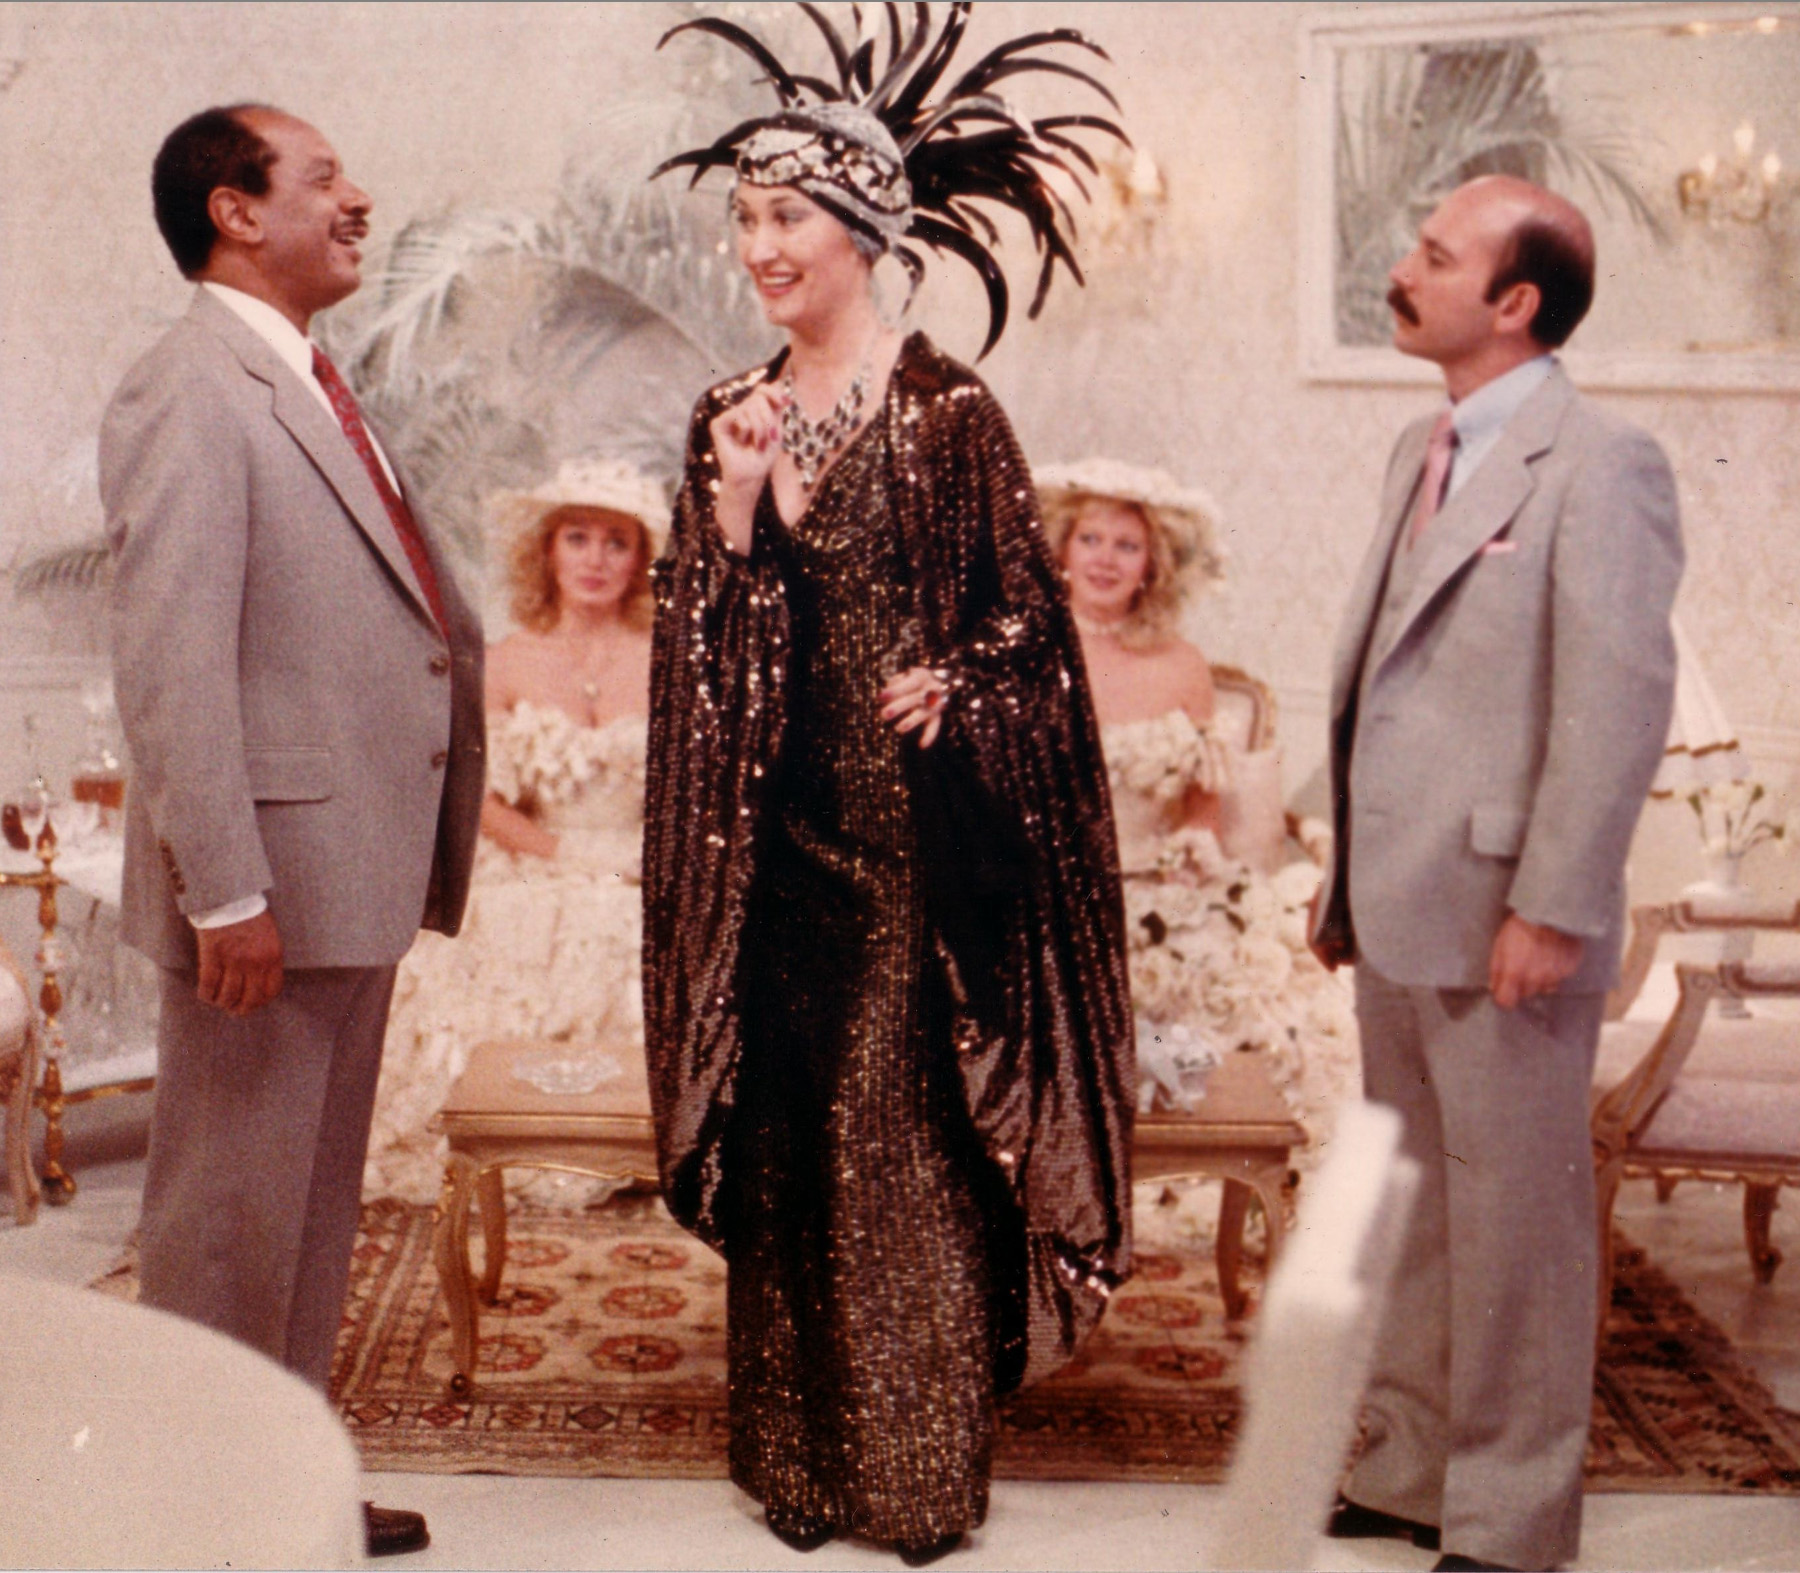 Jennifer Rhodes with Sherman Hemsley and Luis Avalos in GHOST FEVER